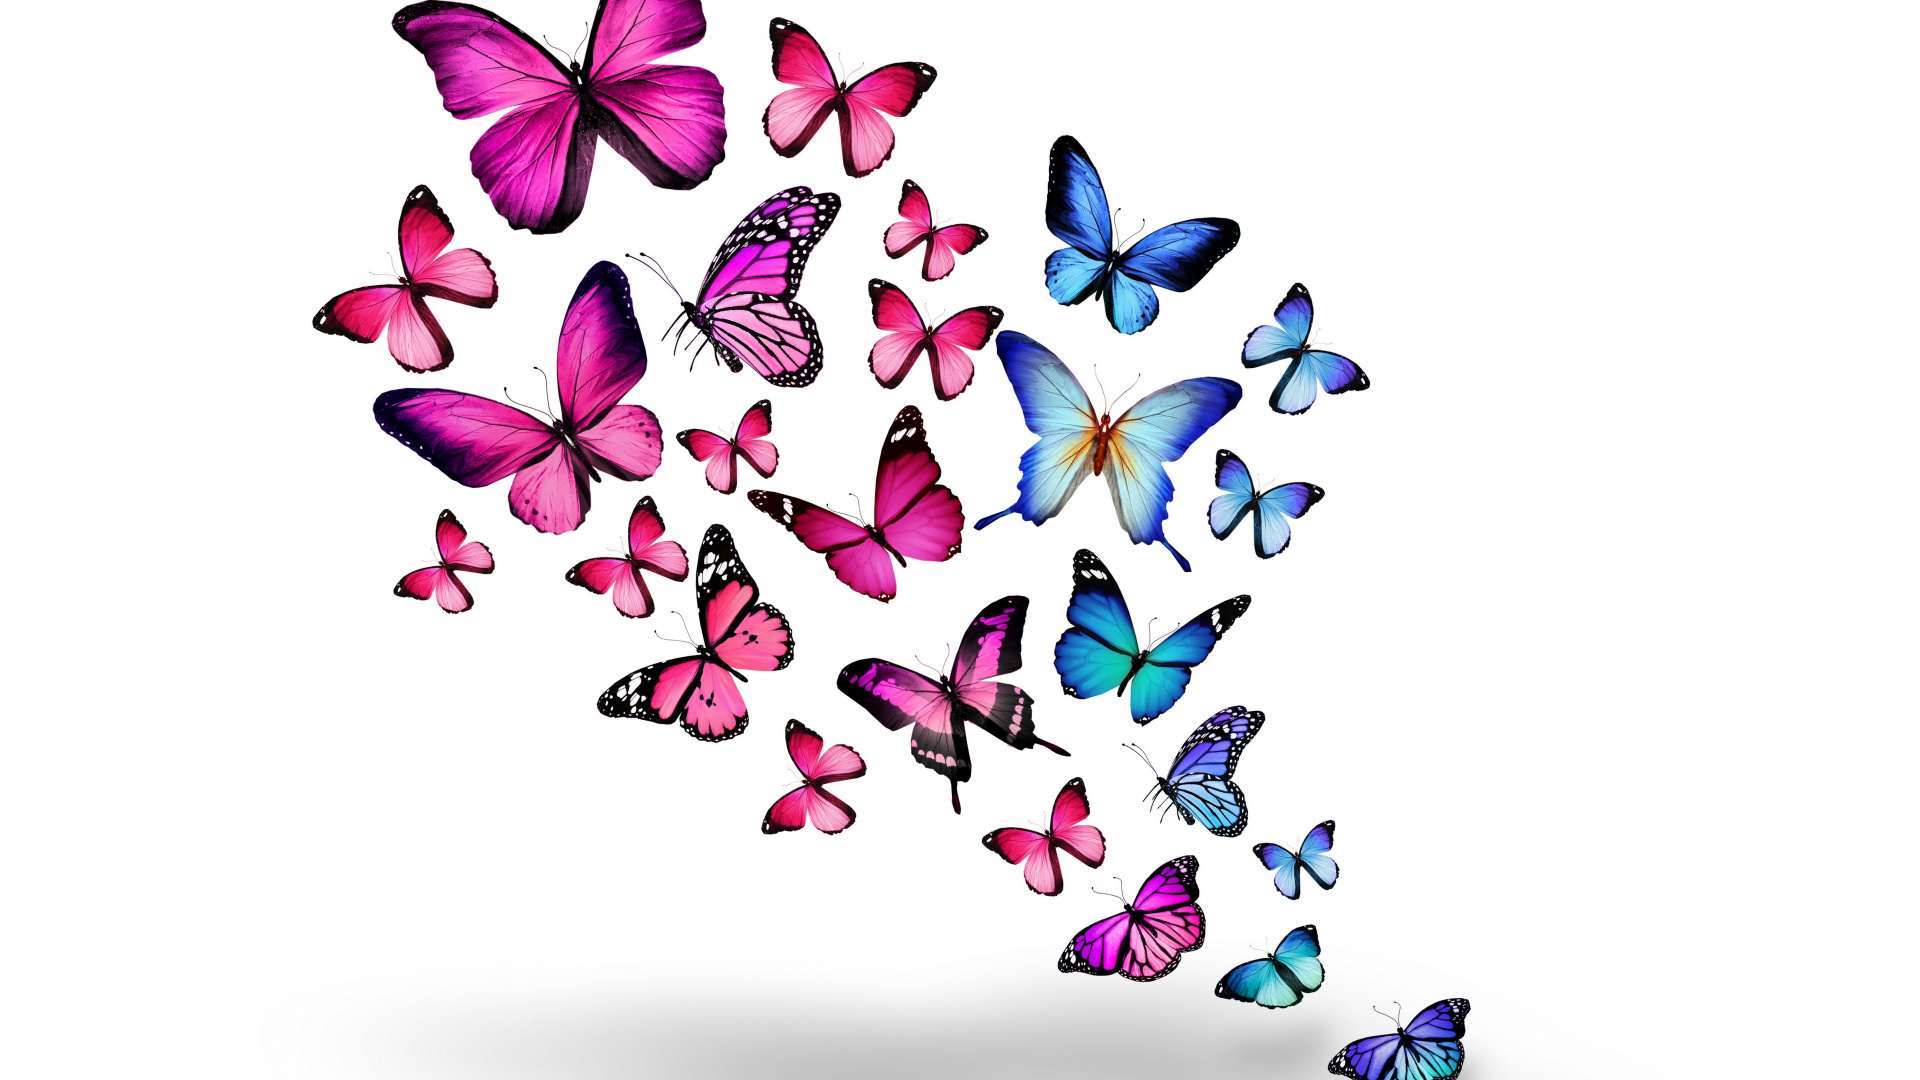 Blue and Purple Butterflies on White Background. Wallpaper in 1920x1080 Resolution